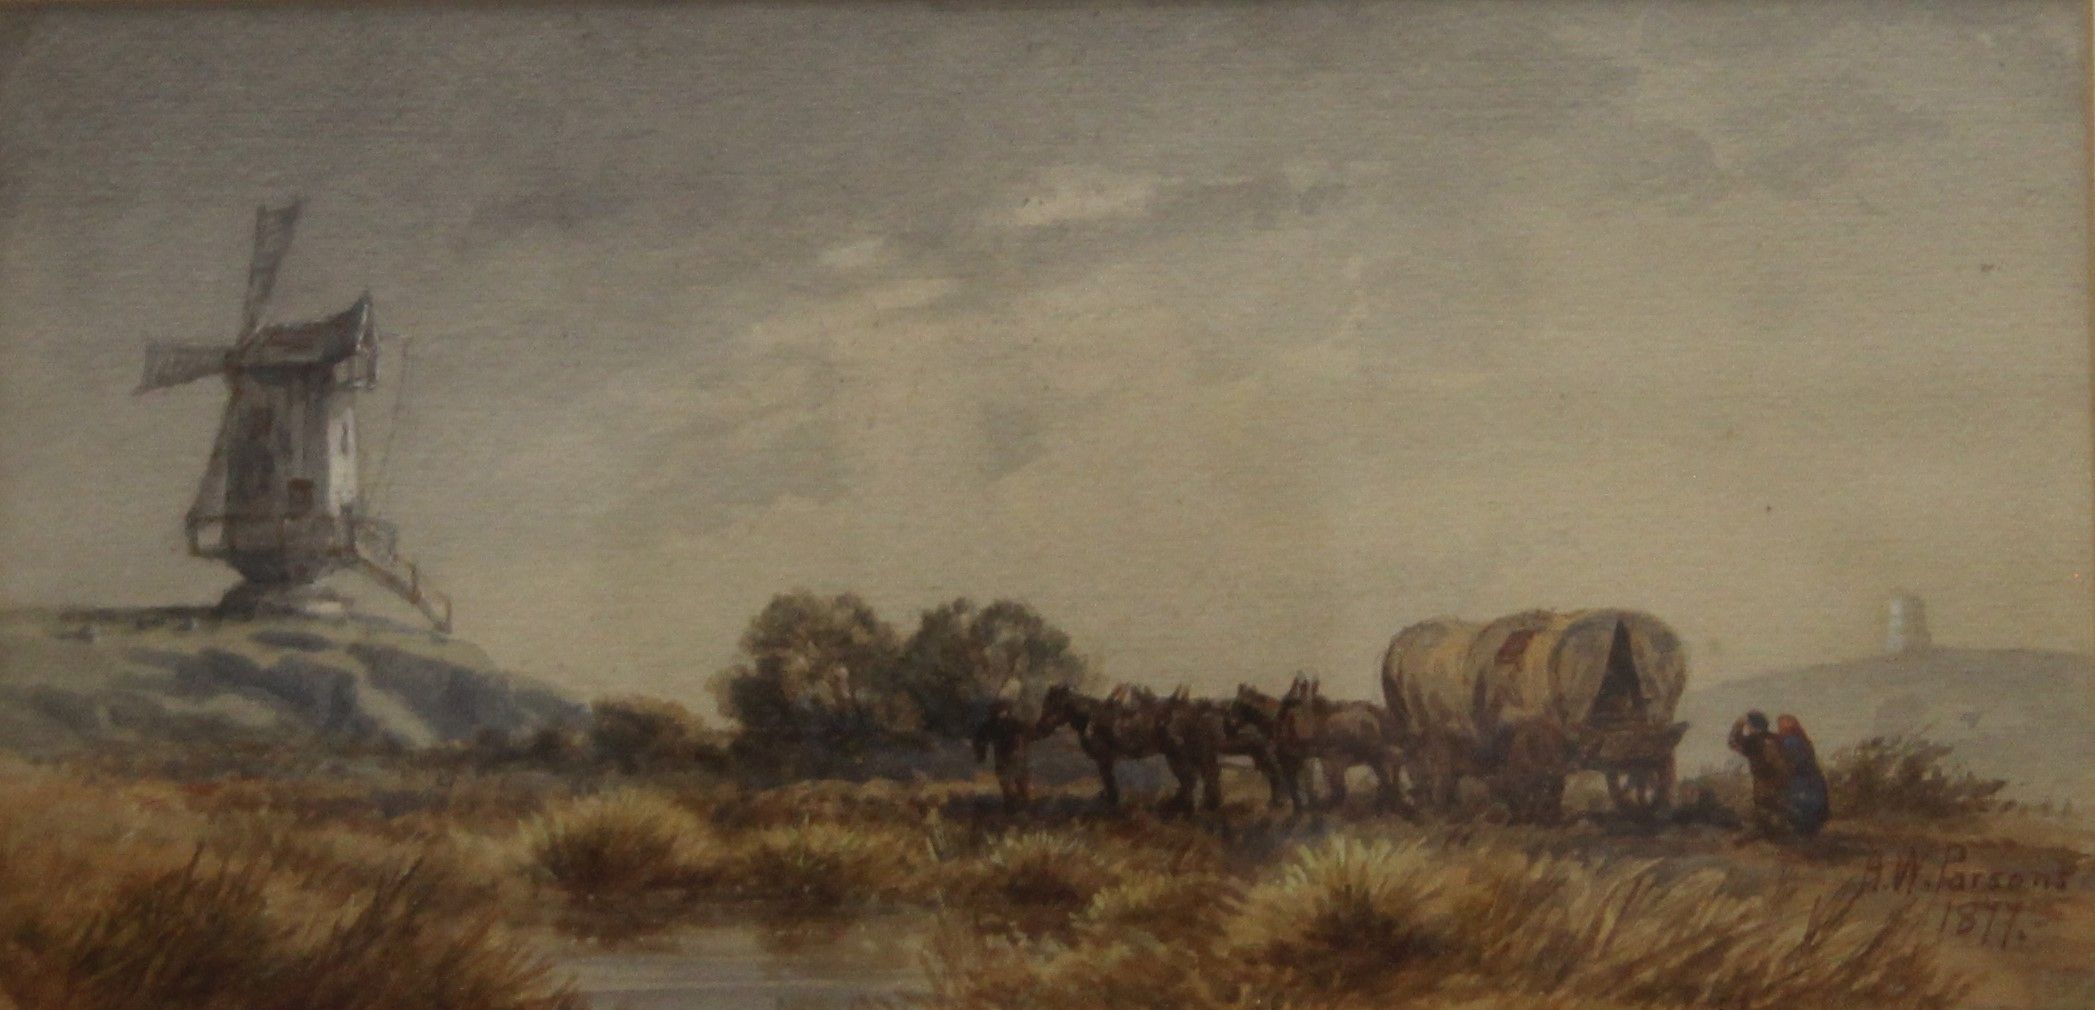 A W PARSONS, Covered Wagon, watercolour, signed and dated 1877, framed and glazed. 28.5 x 14 cm.